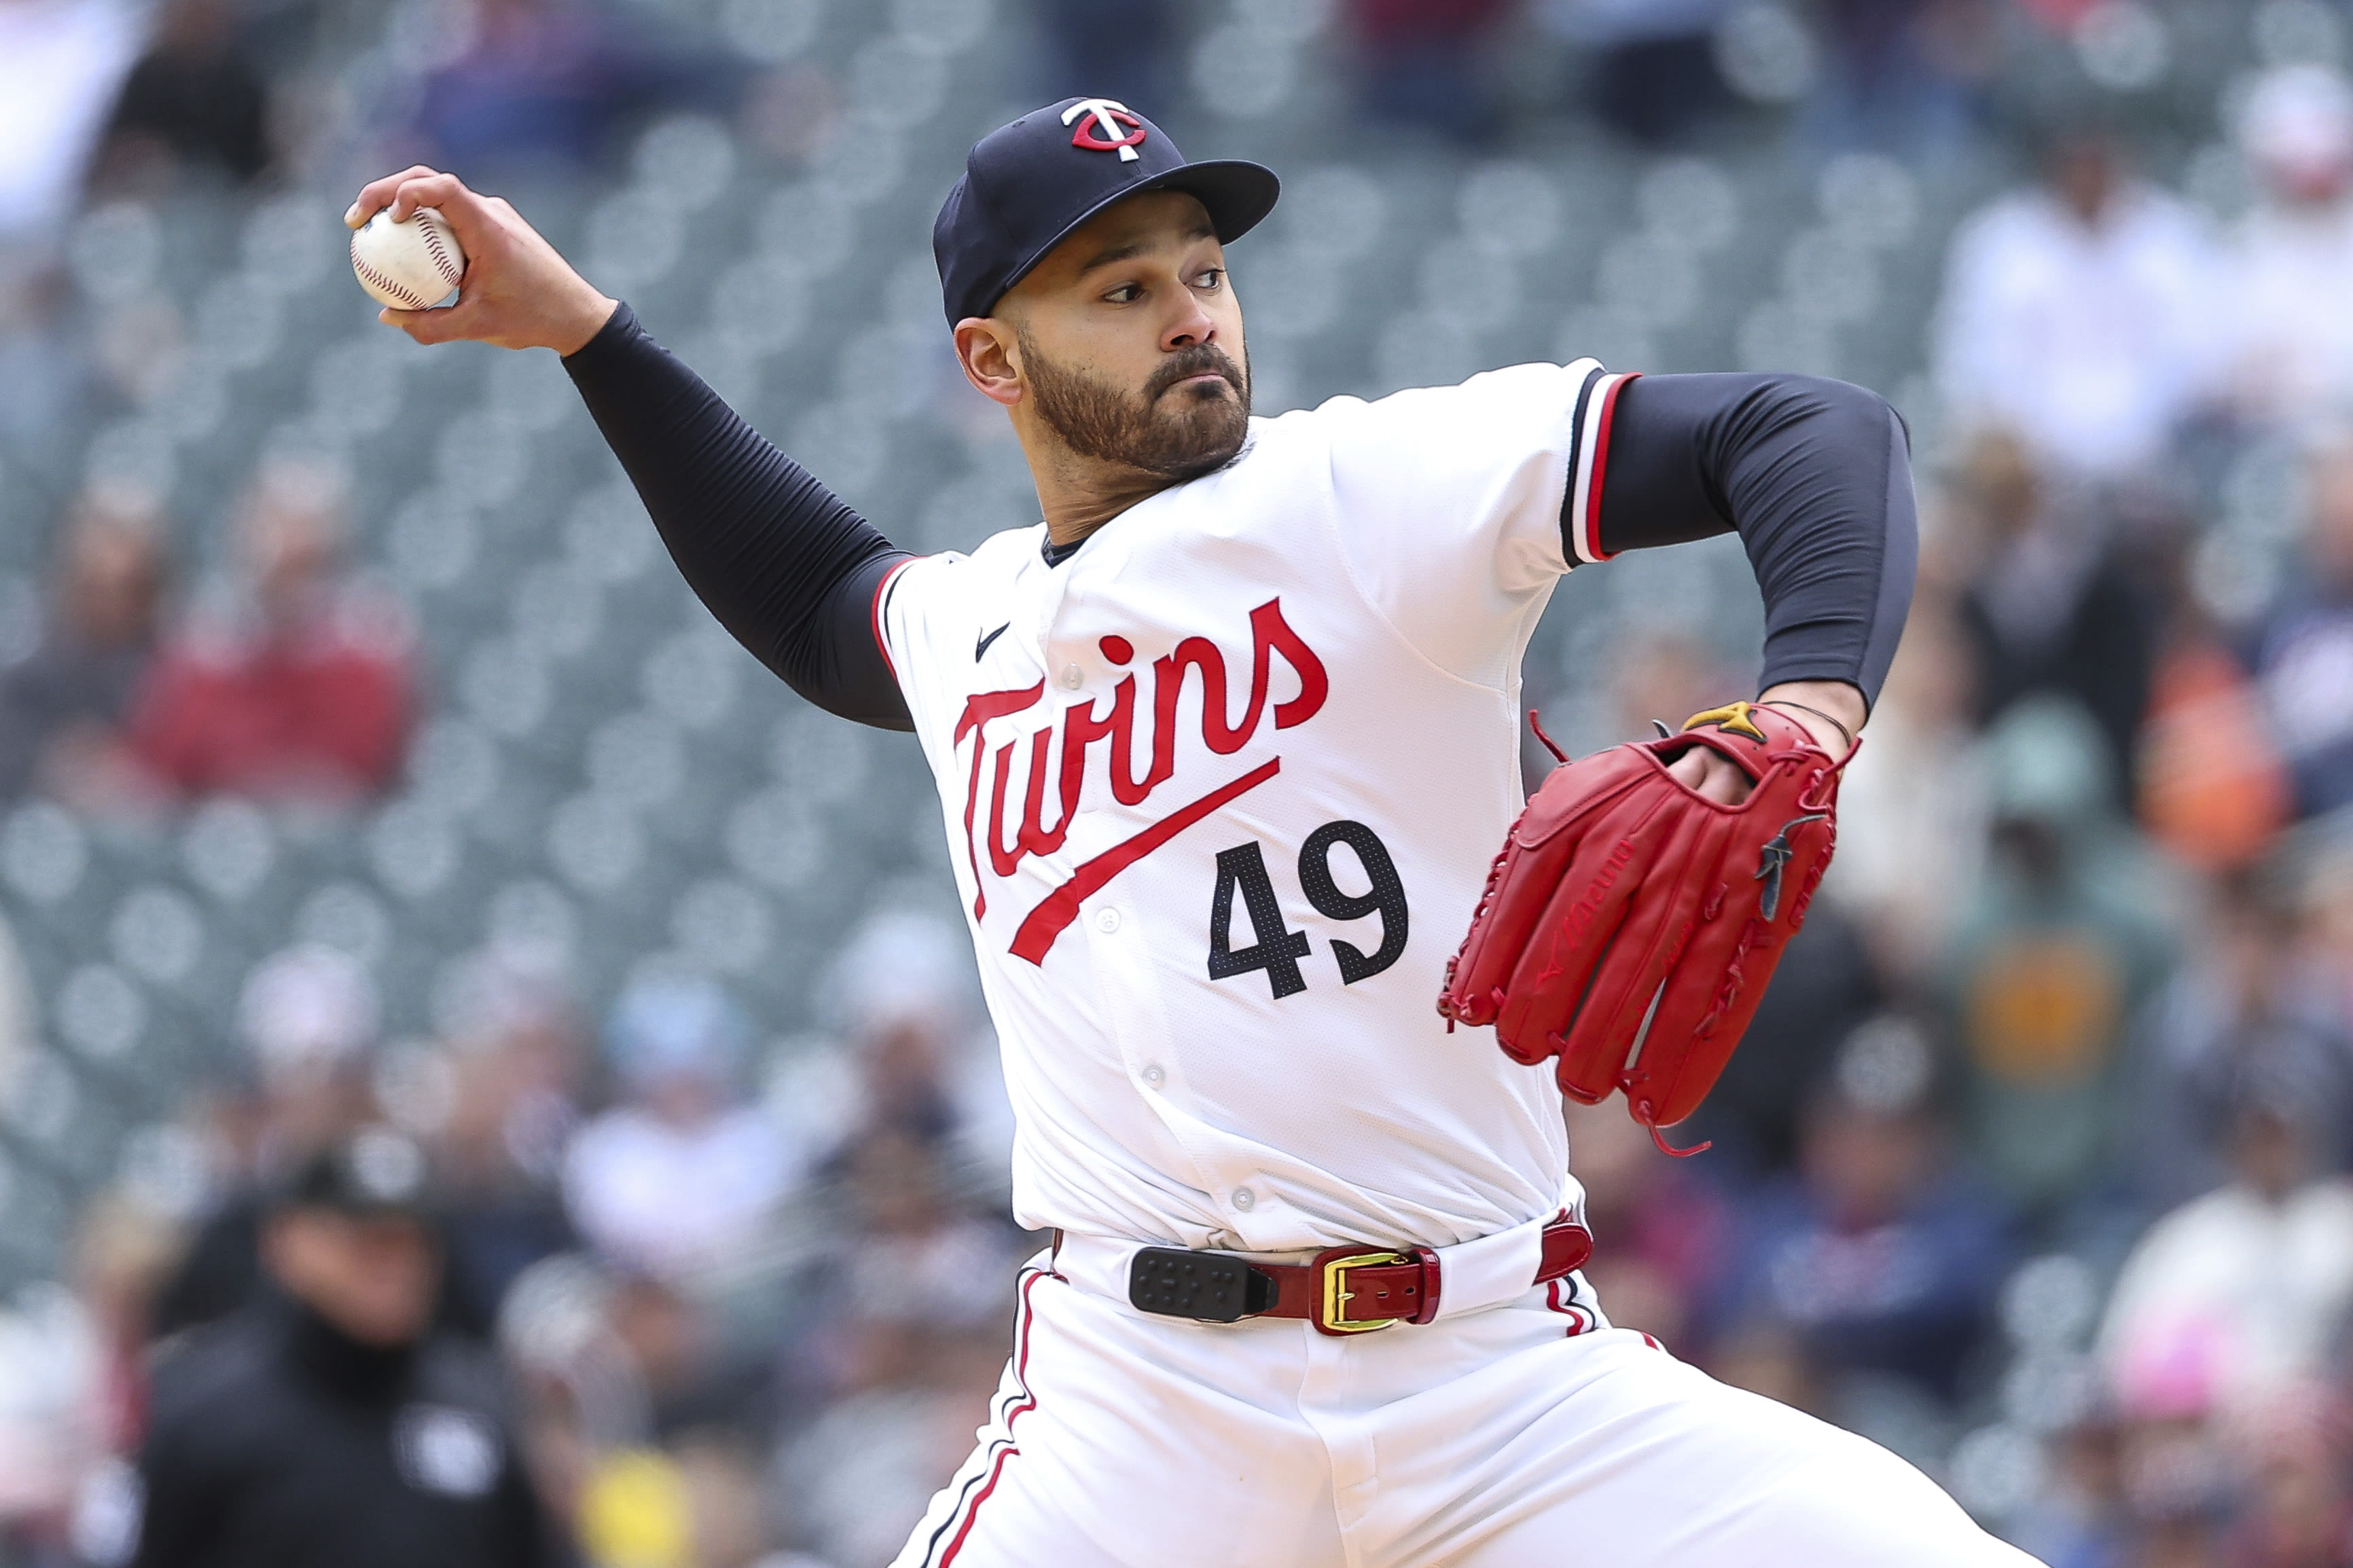 Pablo López strikes out 8 in 6 innings as Twins beat Red Sox 3-1 for 12th straight victory